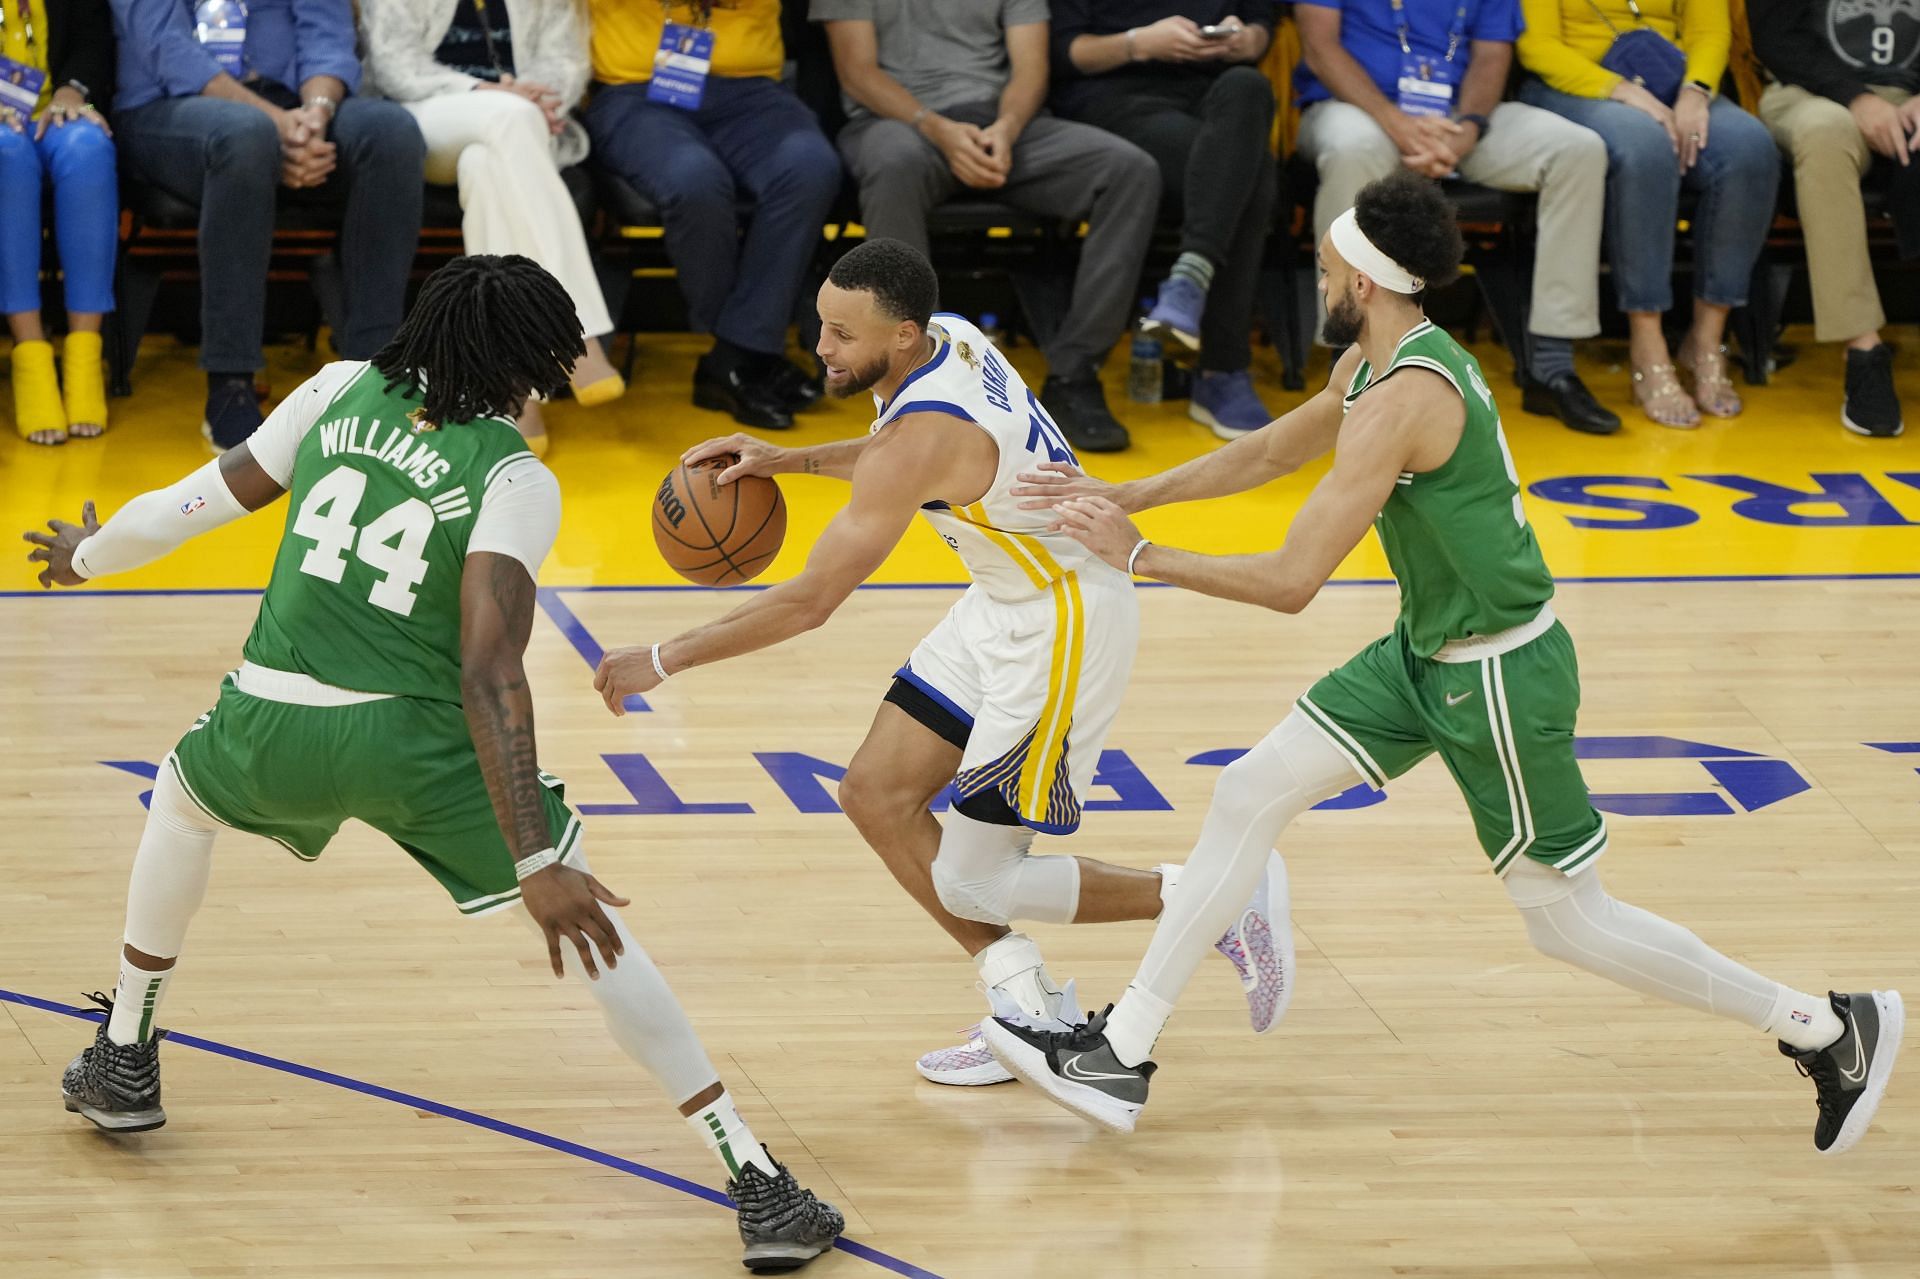 Steph Curry of the Golden State Warriors dribbles against Robert Williams III and Derrick White of the Boston Celtics